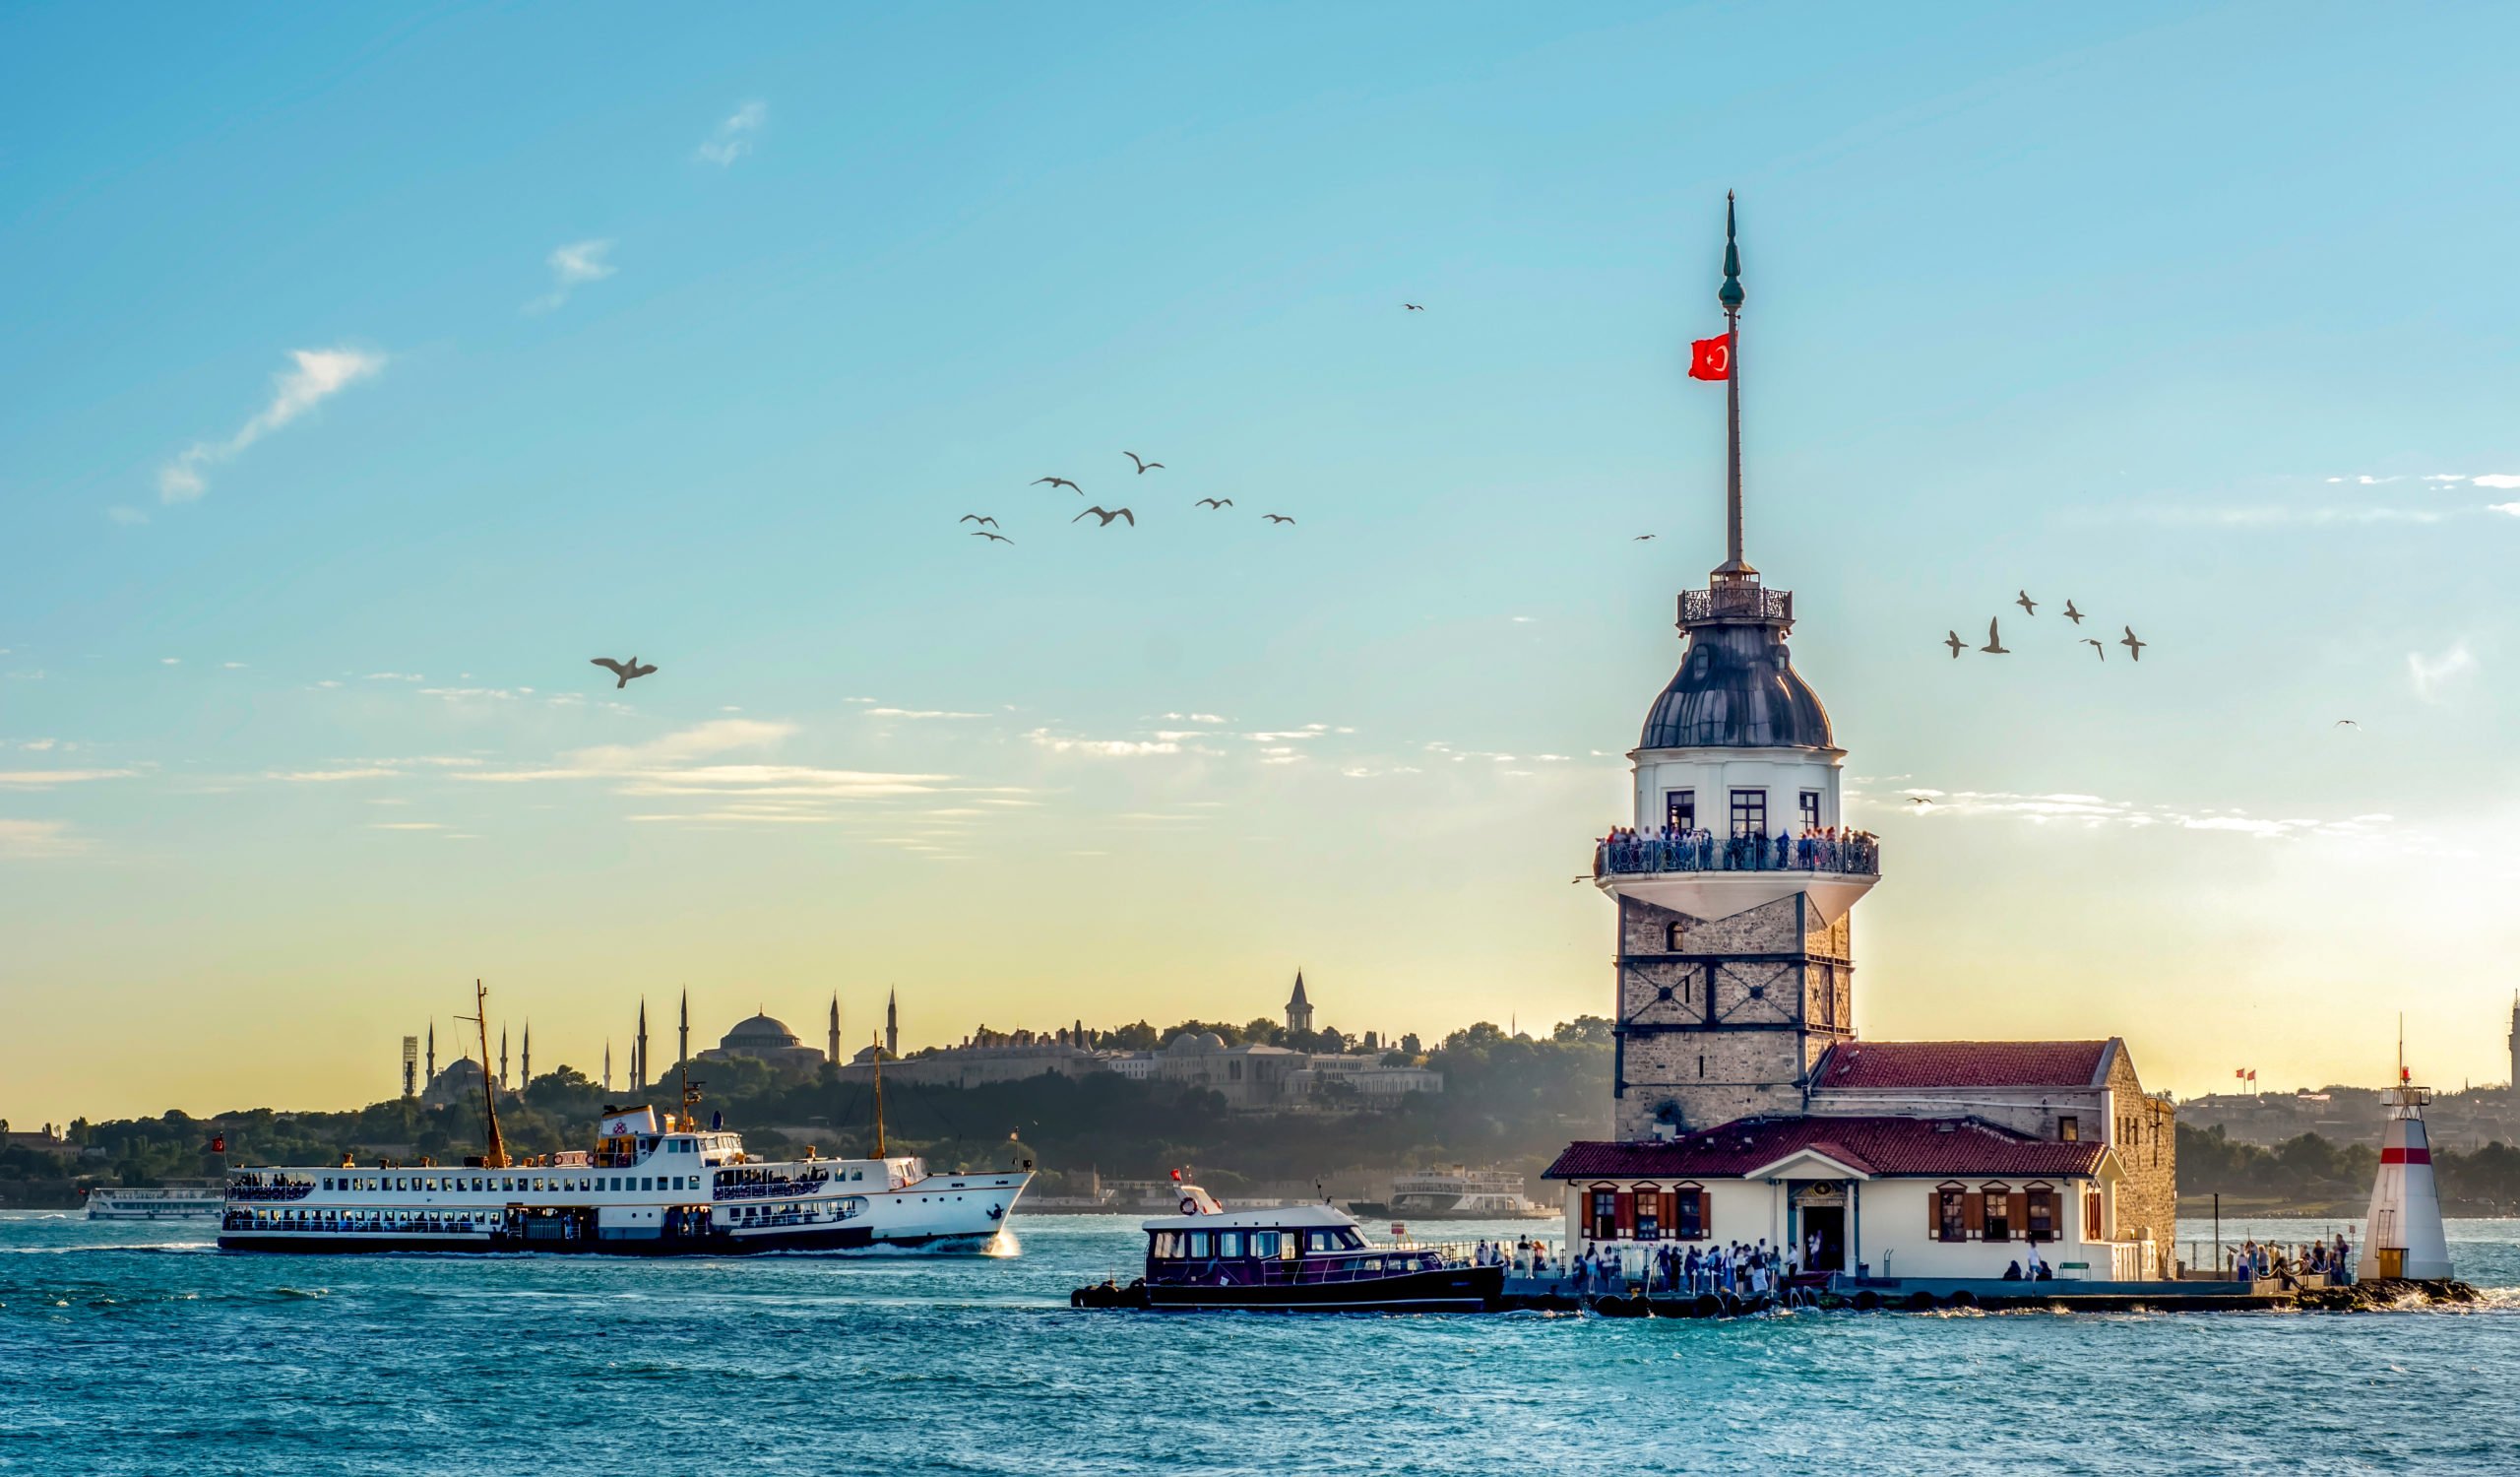 Pass The Maiden Tower On The Dolmabahce Palace Tour & Bosporus Cruise From Istanbul